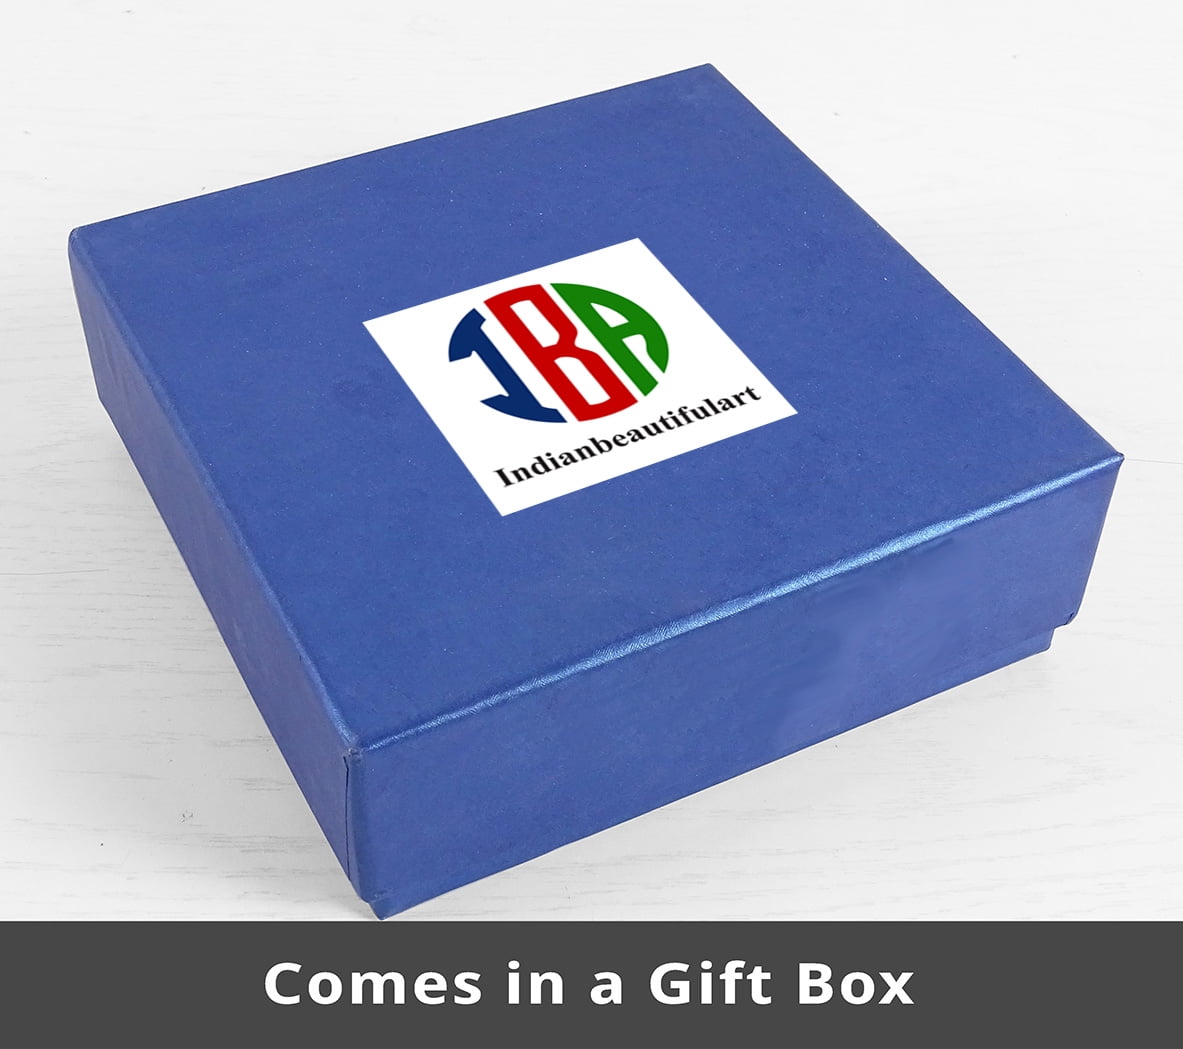 U CHOOSE Details about   GIFT BOXES WHITE SETS OF 20-10 ASSORTED SIZES OR 2 BOX 19" X 14.5" 